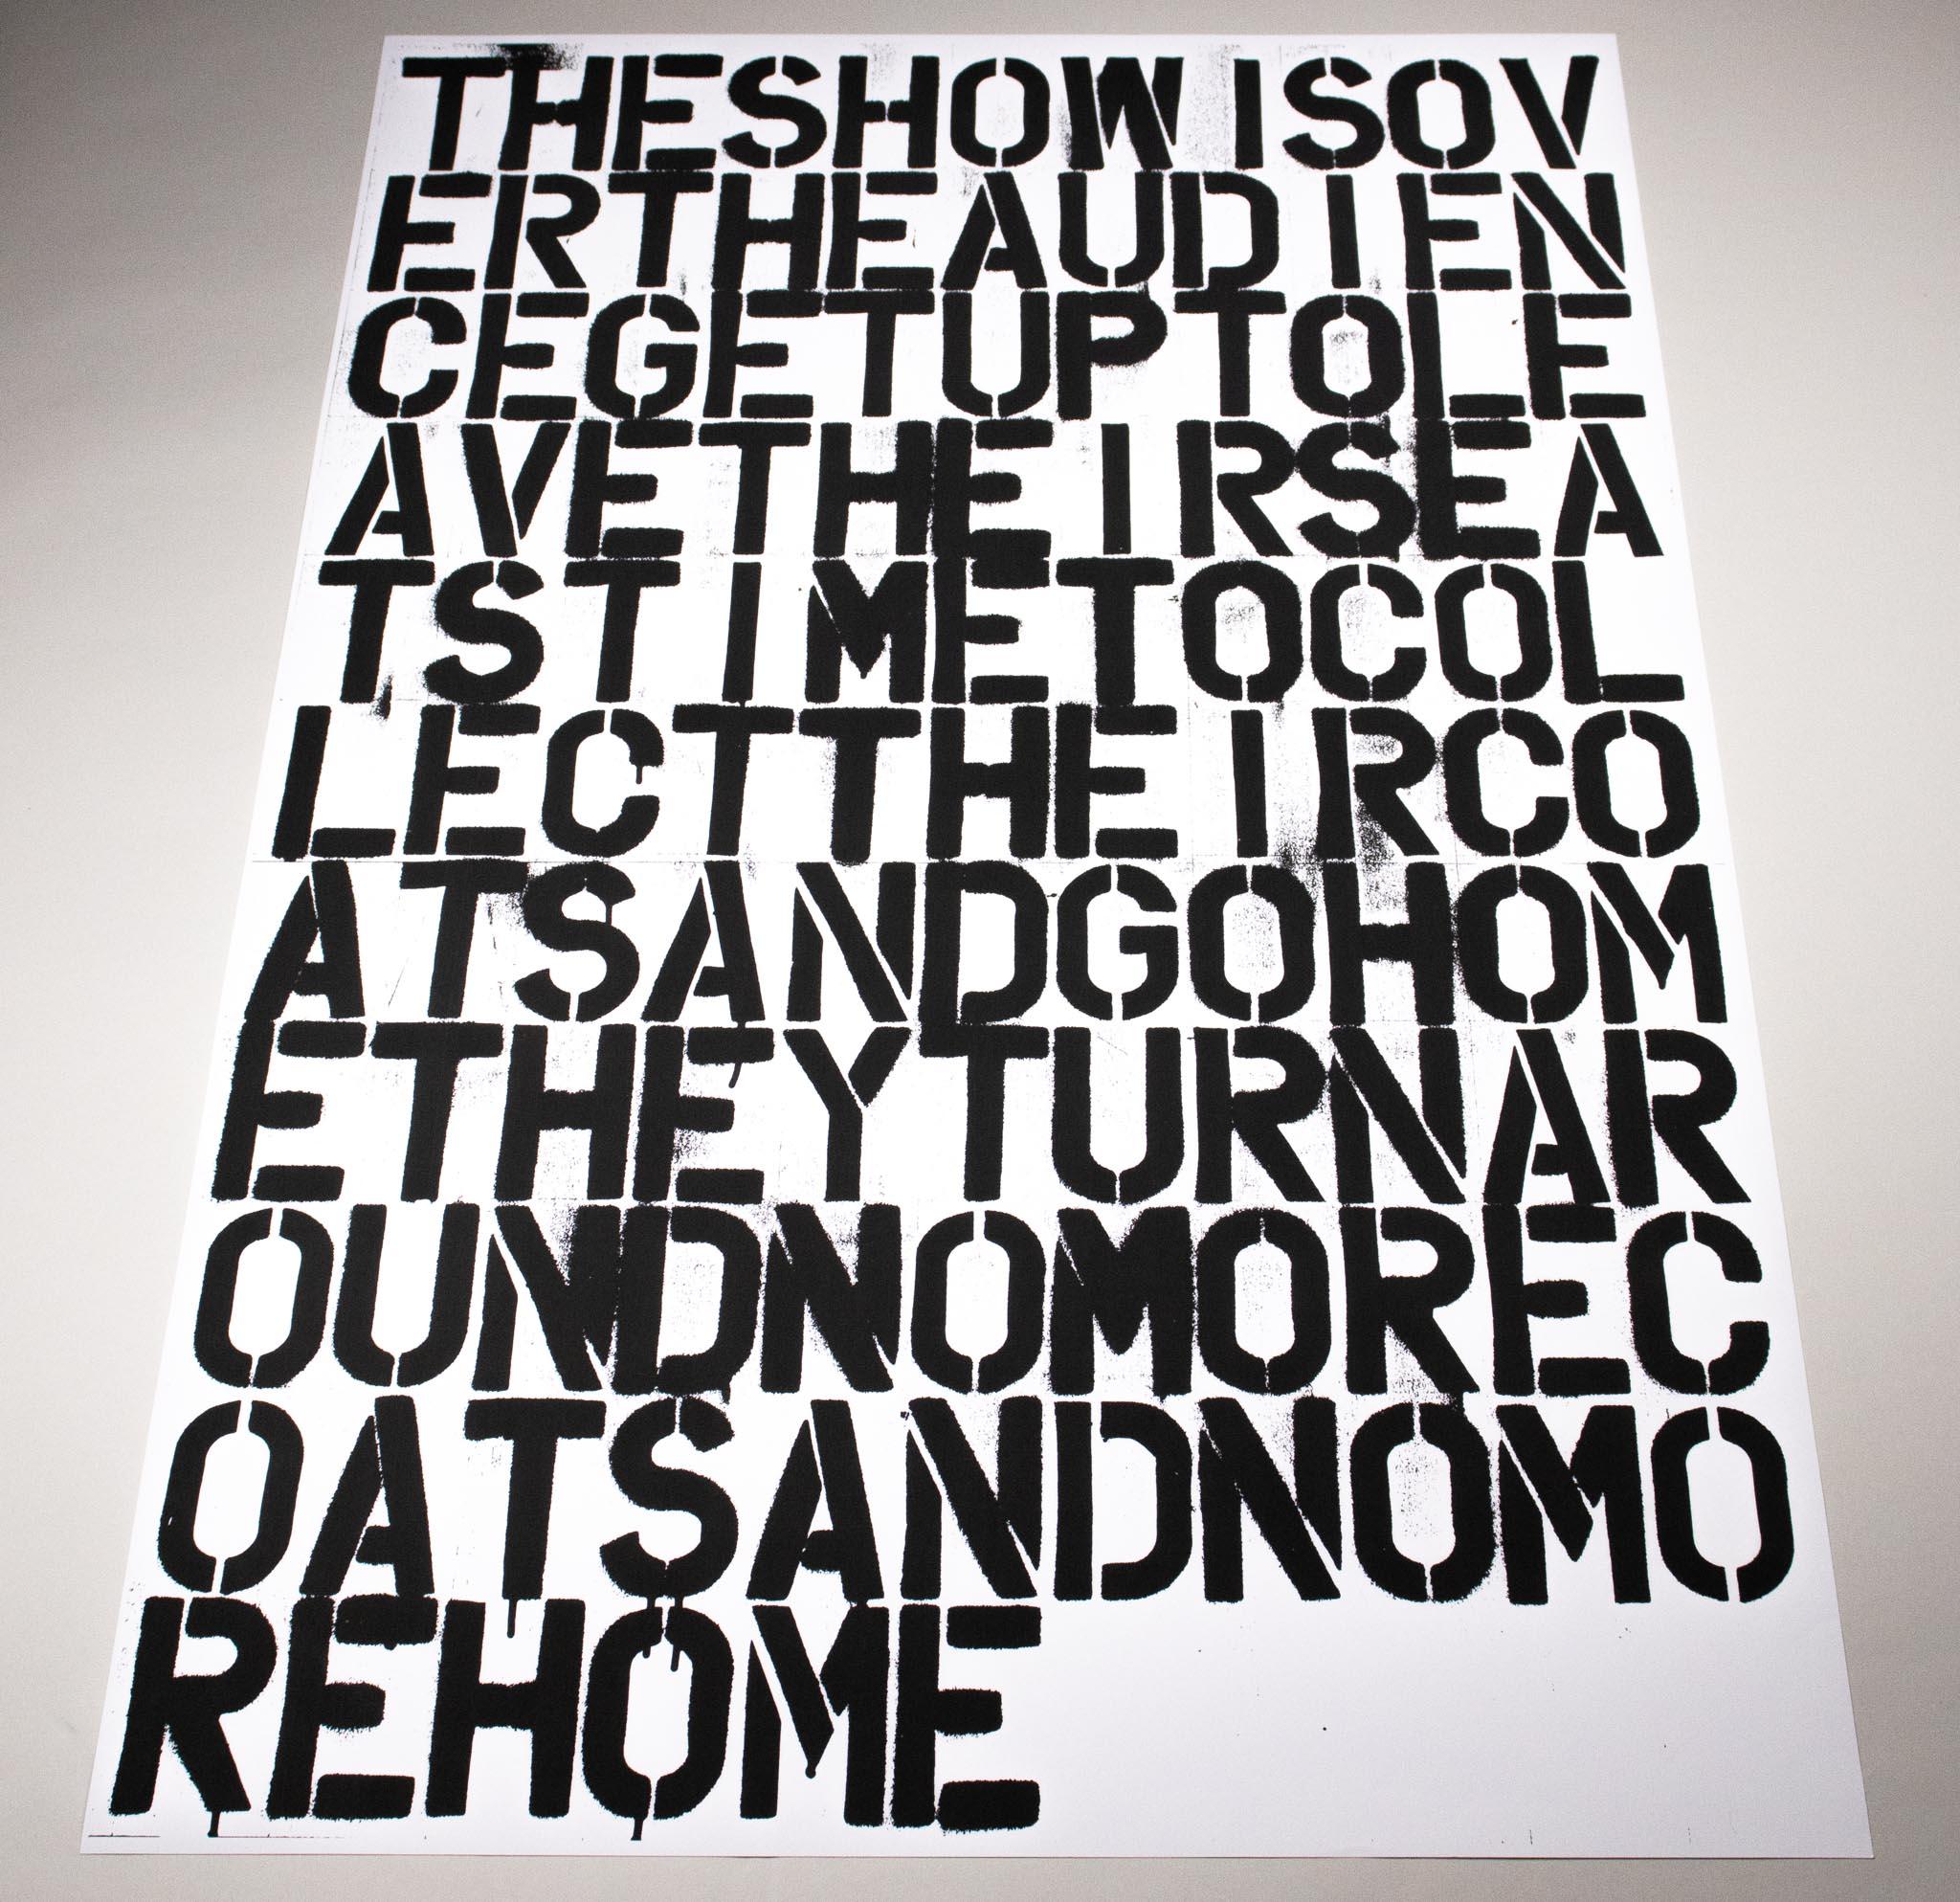 Untitled (The Show is Over) - 2019 (1993) - Original Lithograph - Licensed New - Print by Christopher Wool